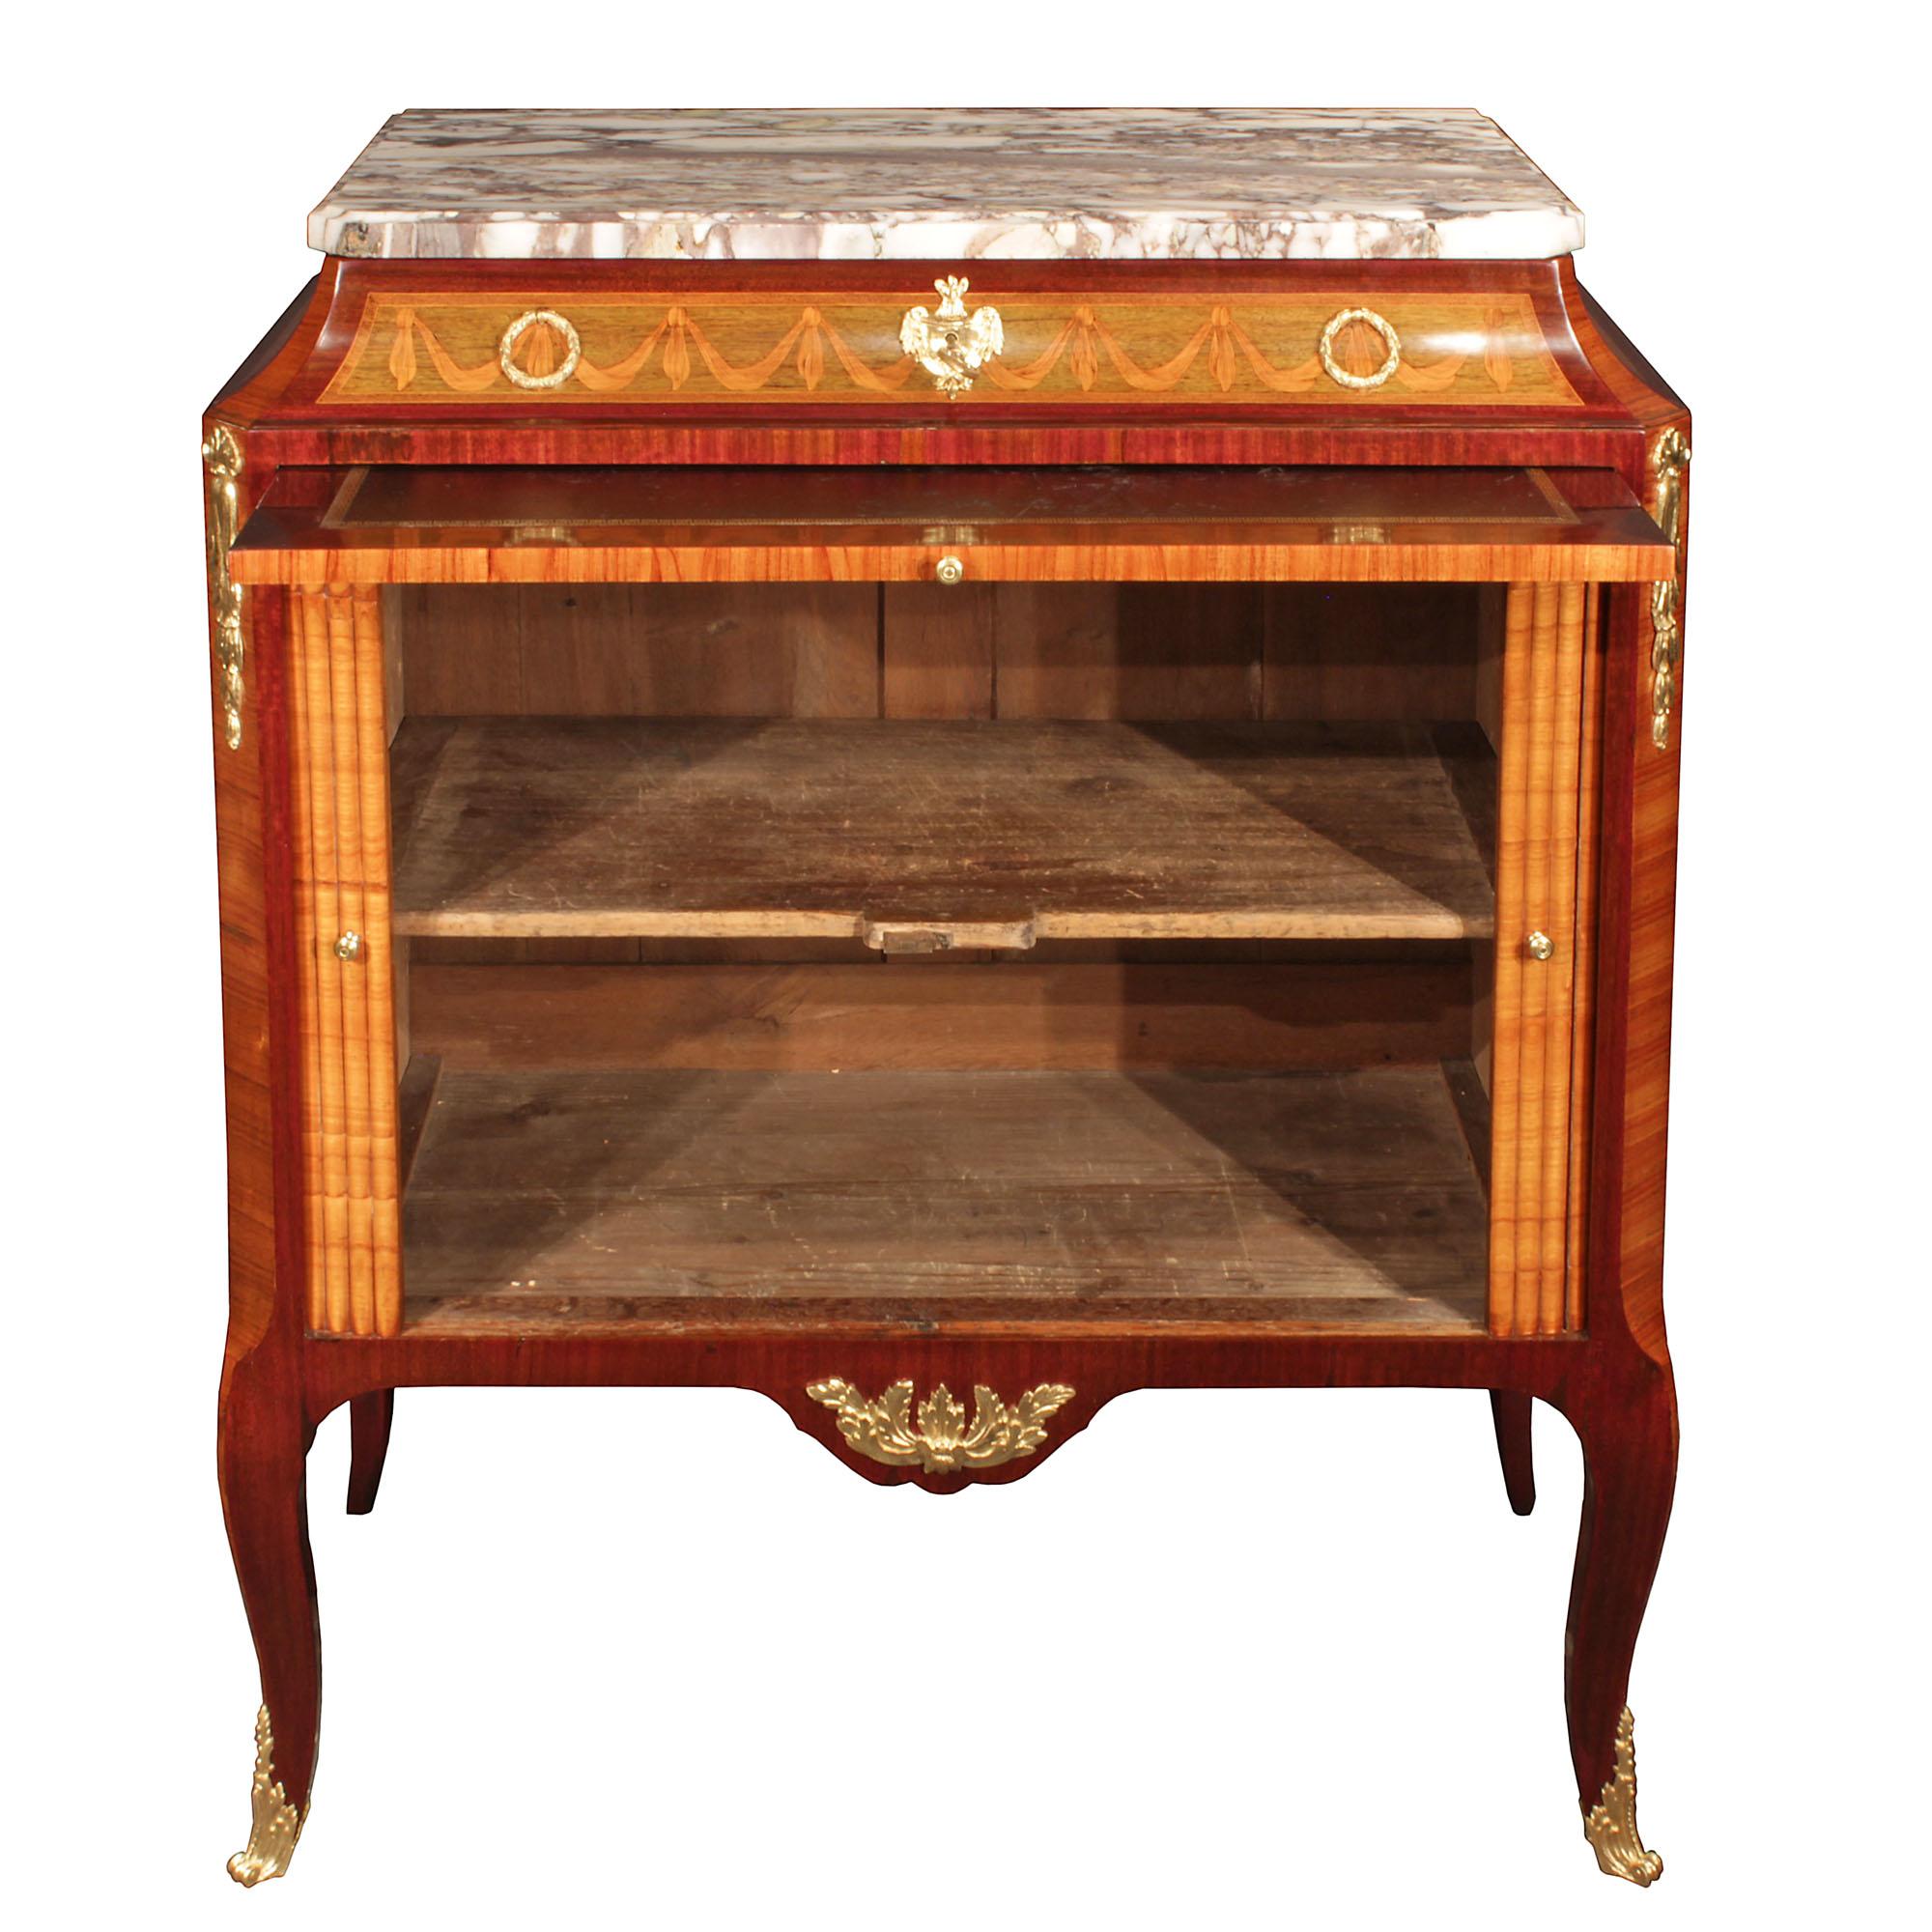 French 19th Century Transitional St. Tulipwood Marquetry Cabinet In Good Condition For Sale In West Palm Beach, FL